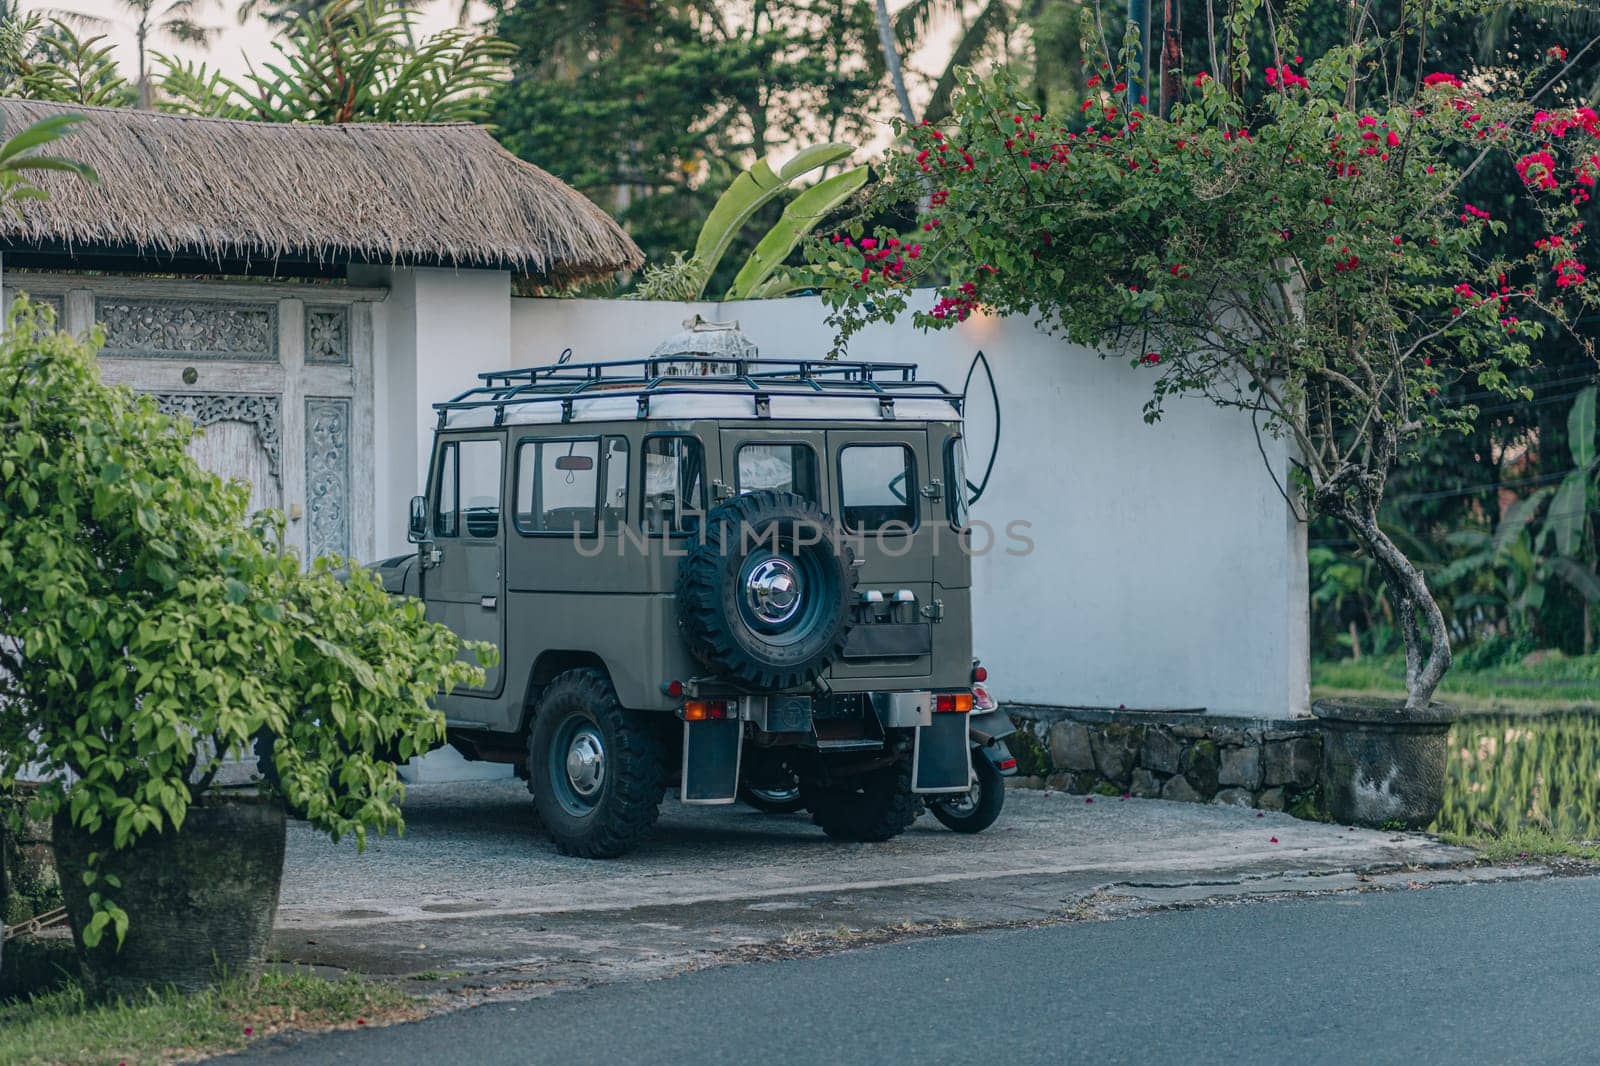 Back view of safari jeep parked at home garden by Popov